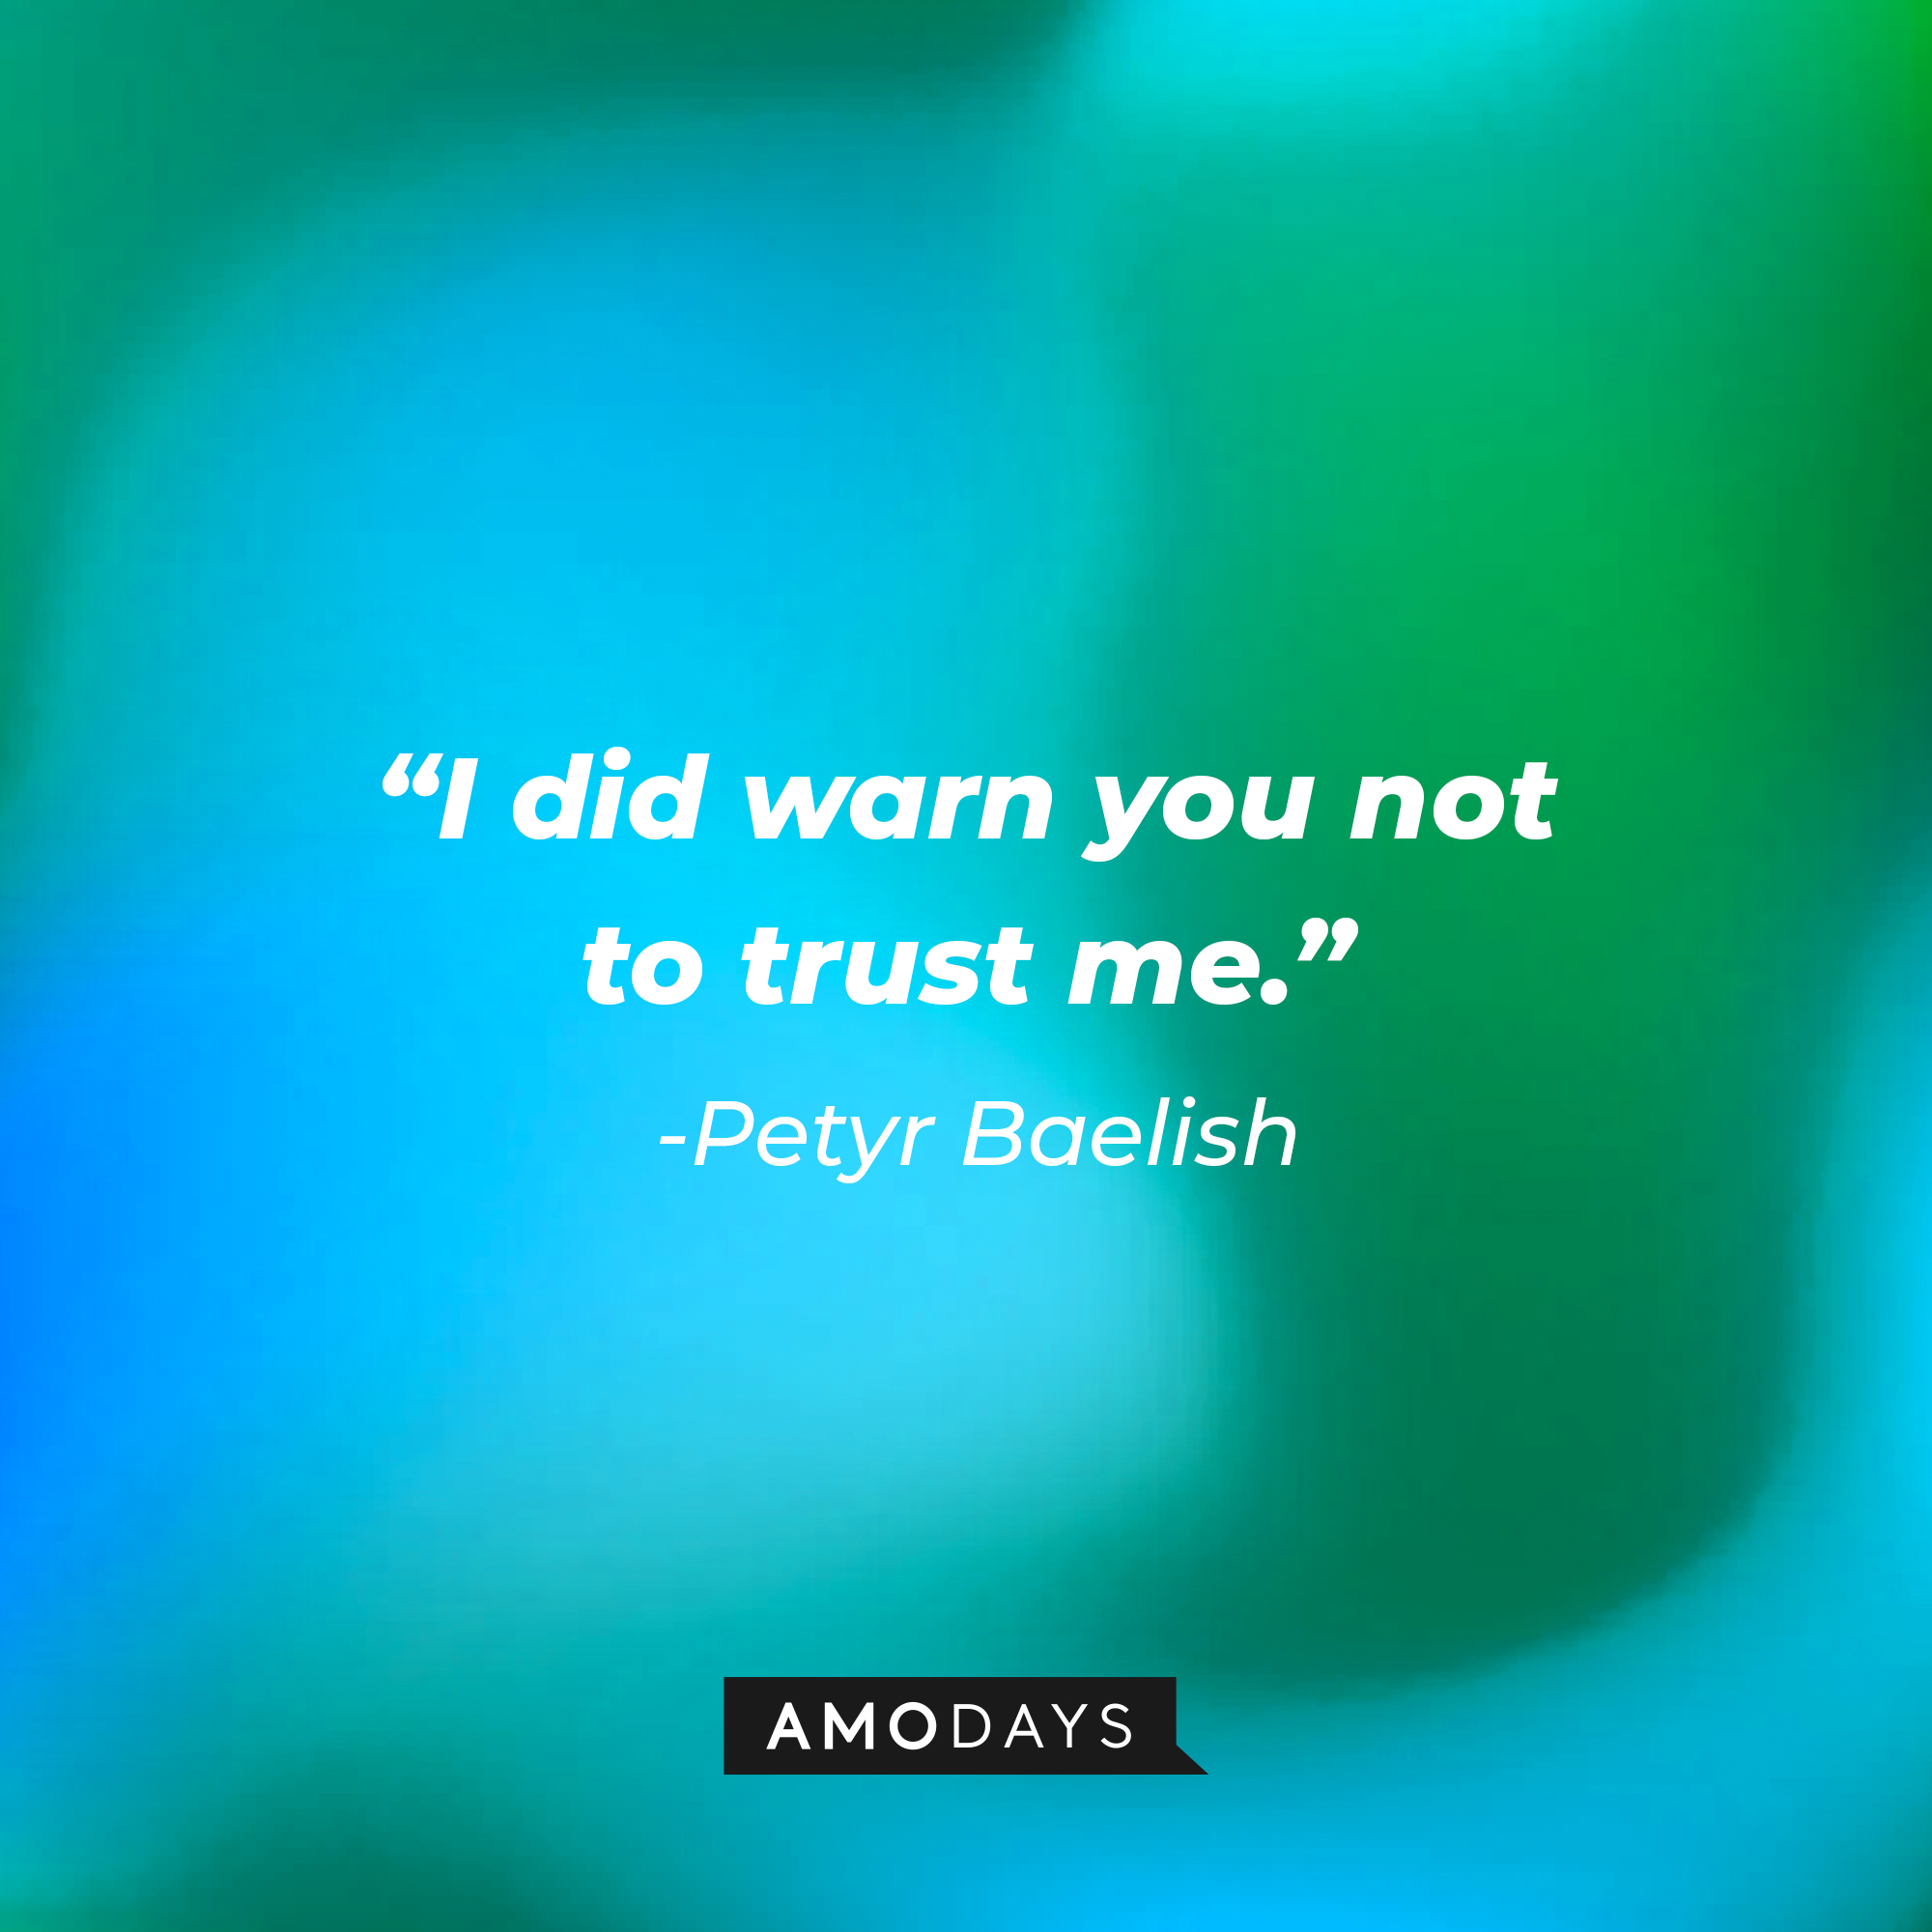 Petyr Baelish’s quote: “I did warn you not to trust me.”  | Source: AmoDays